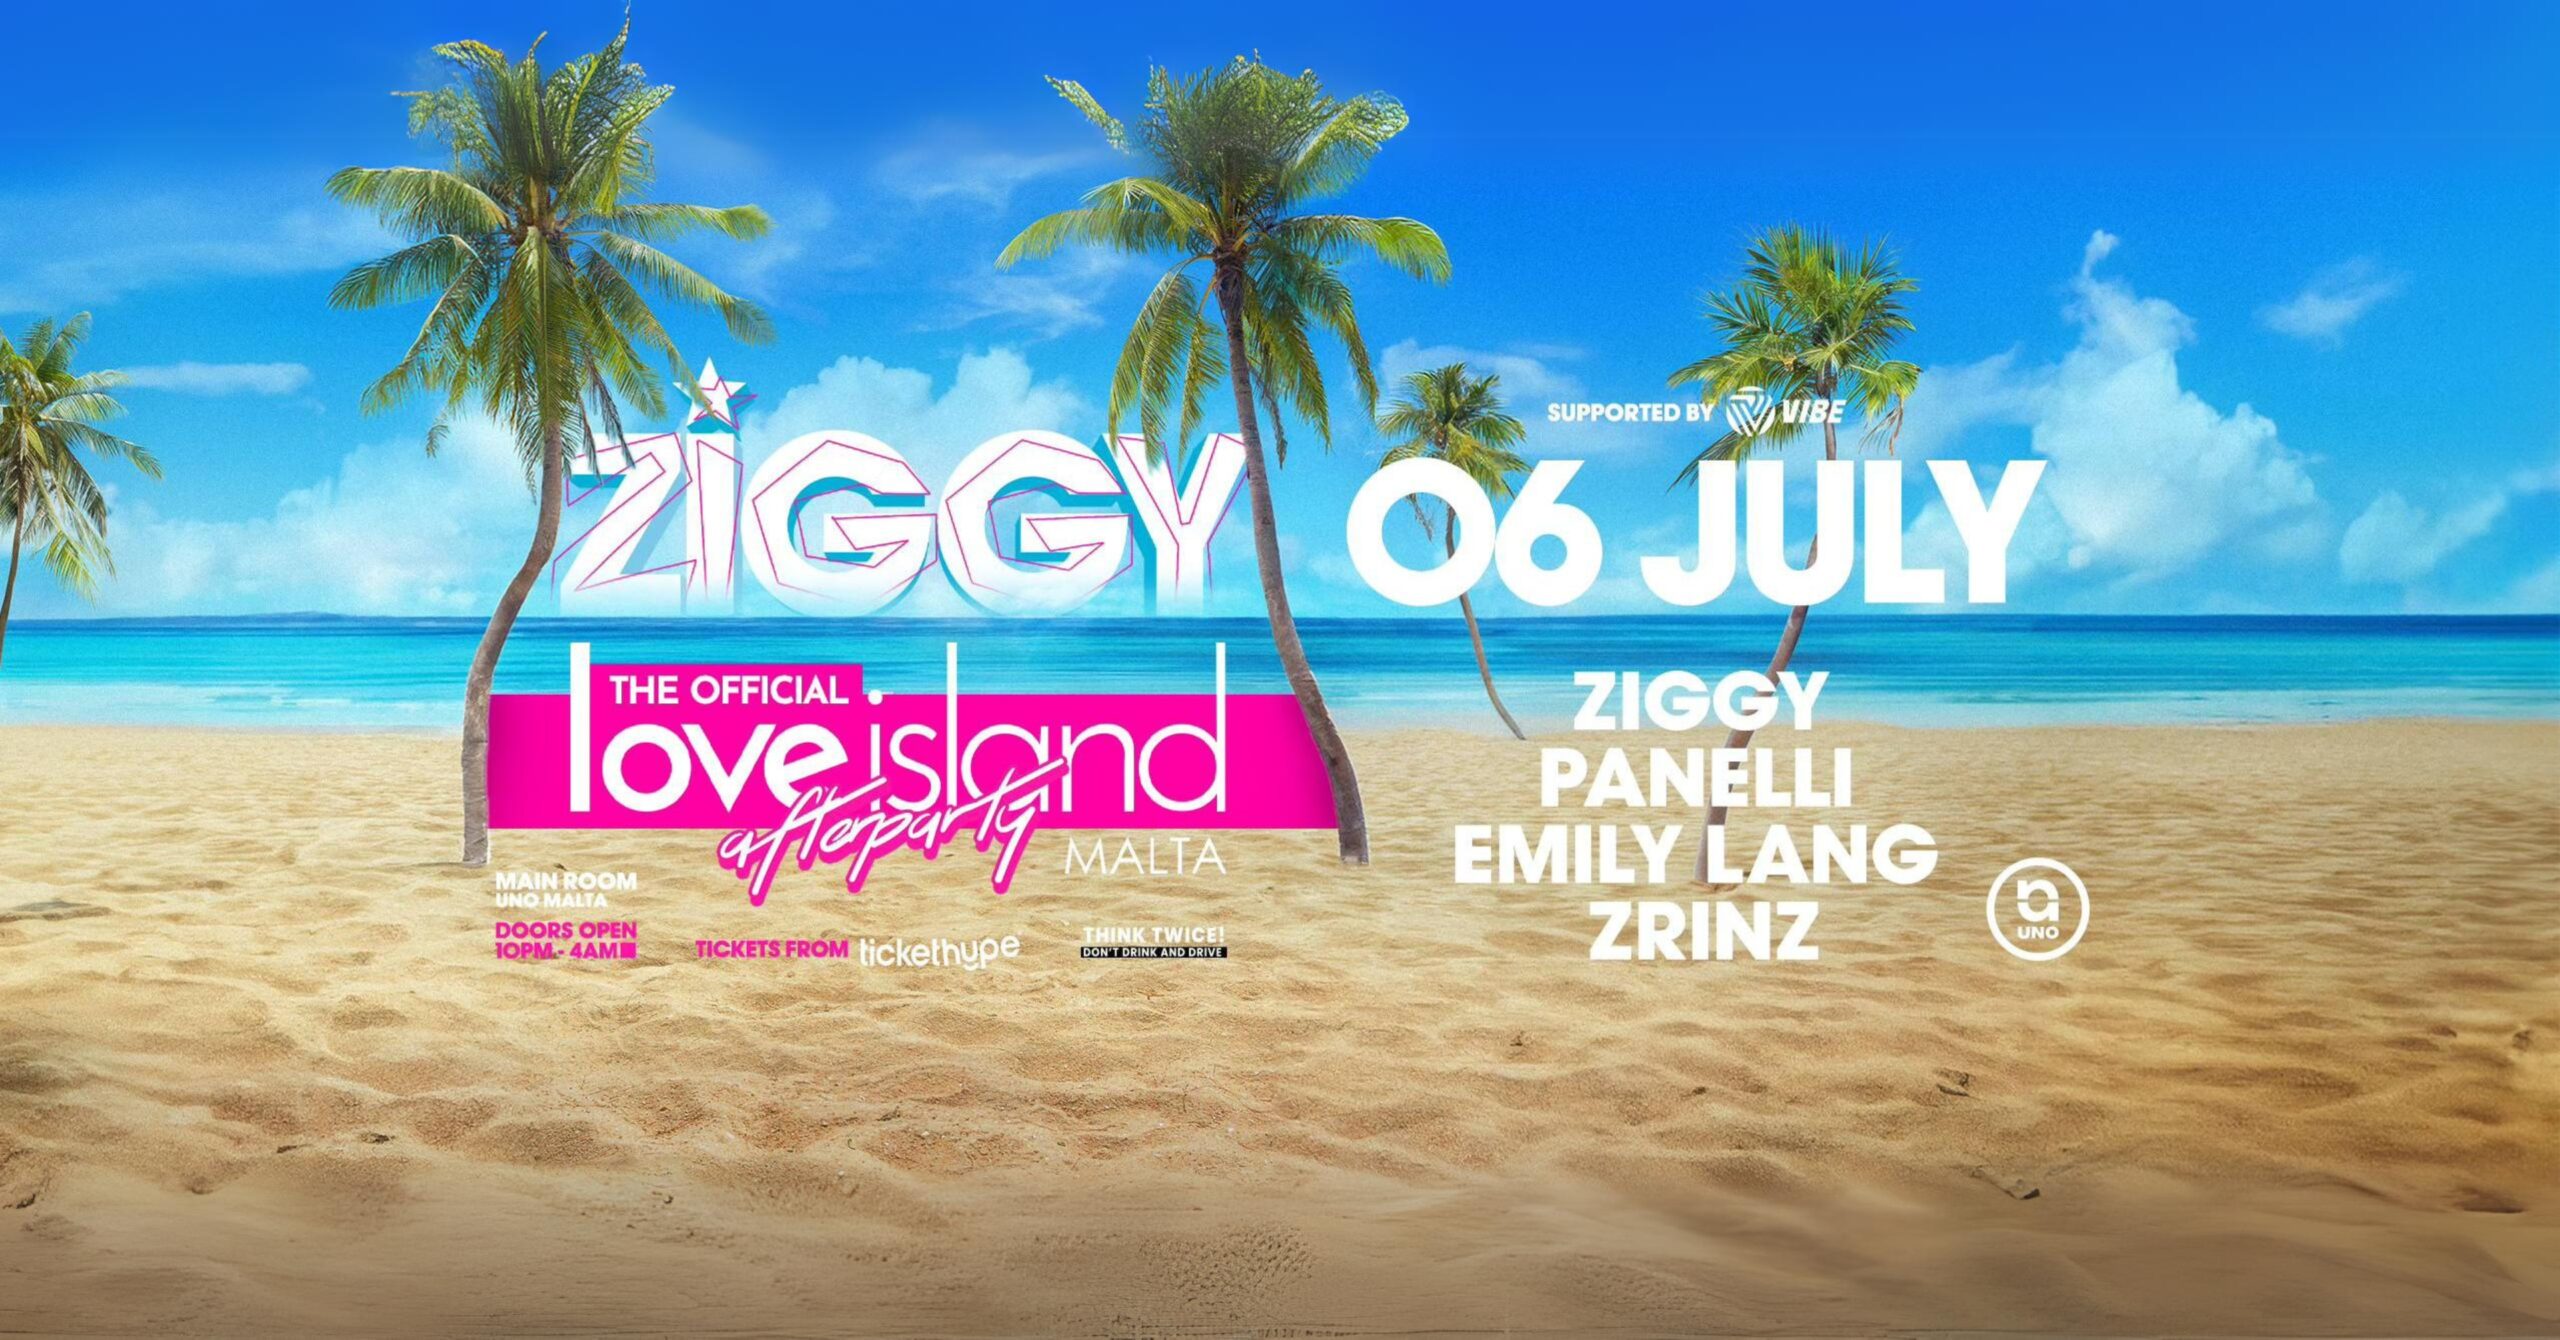 Ziggy's Love Island Afterparty Poster